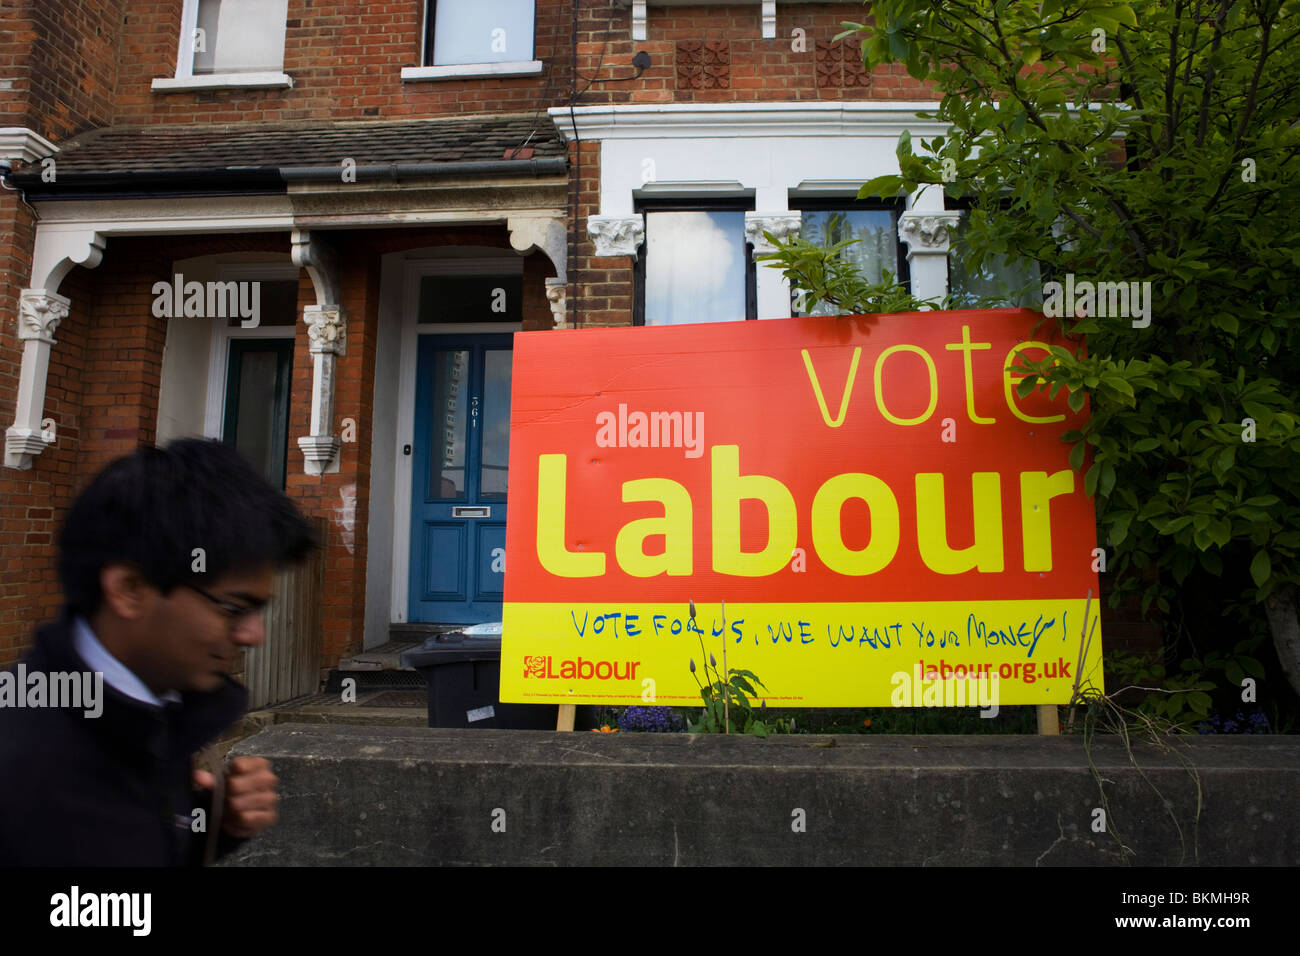 A defaced Labour Party poster is displayed in a front garden in Herne Hill, South London. Seat of Tessa Jowell MP. Stock Photo